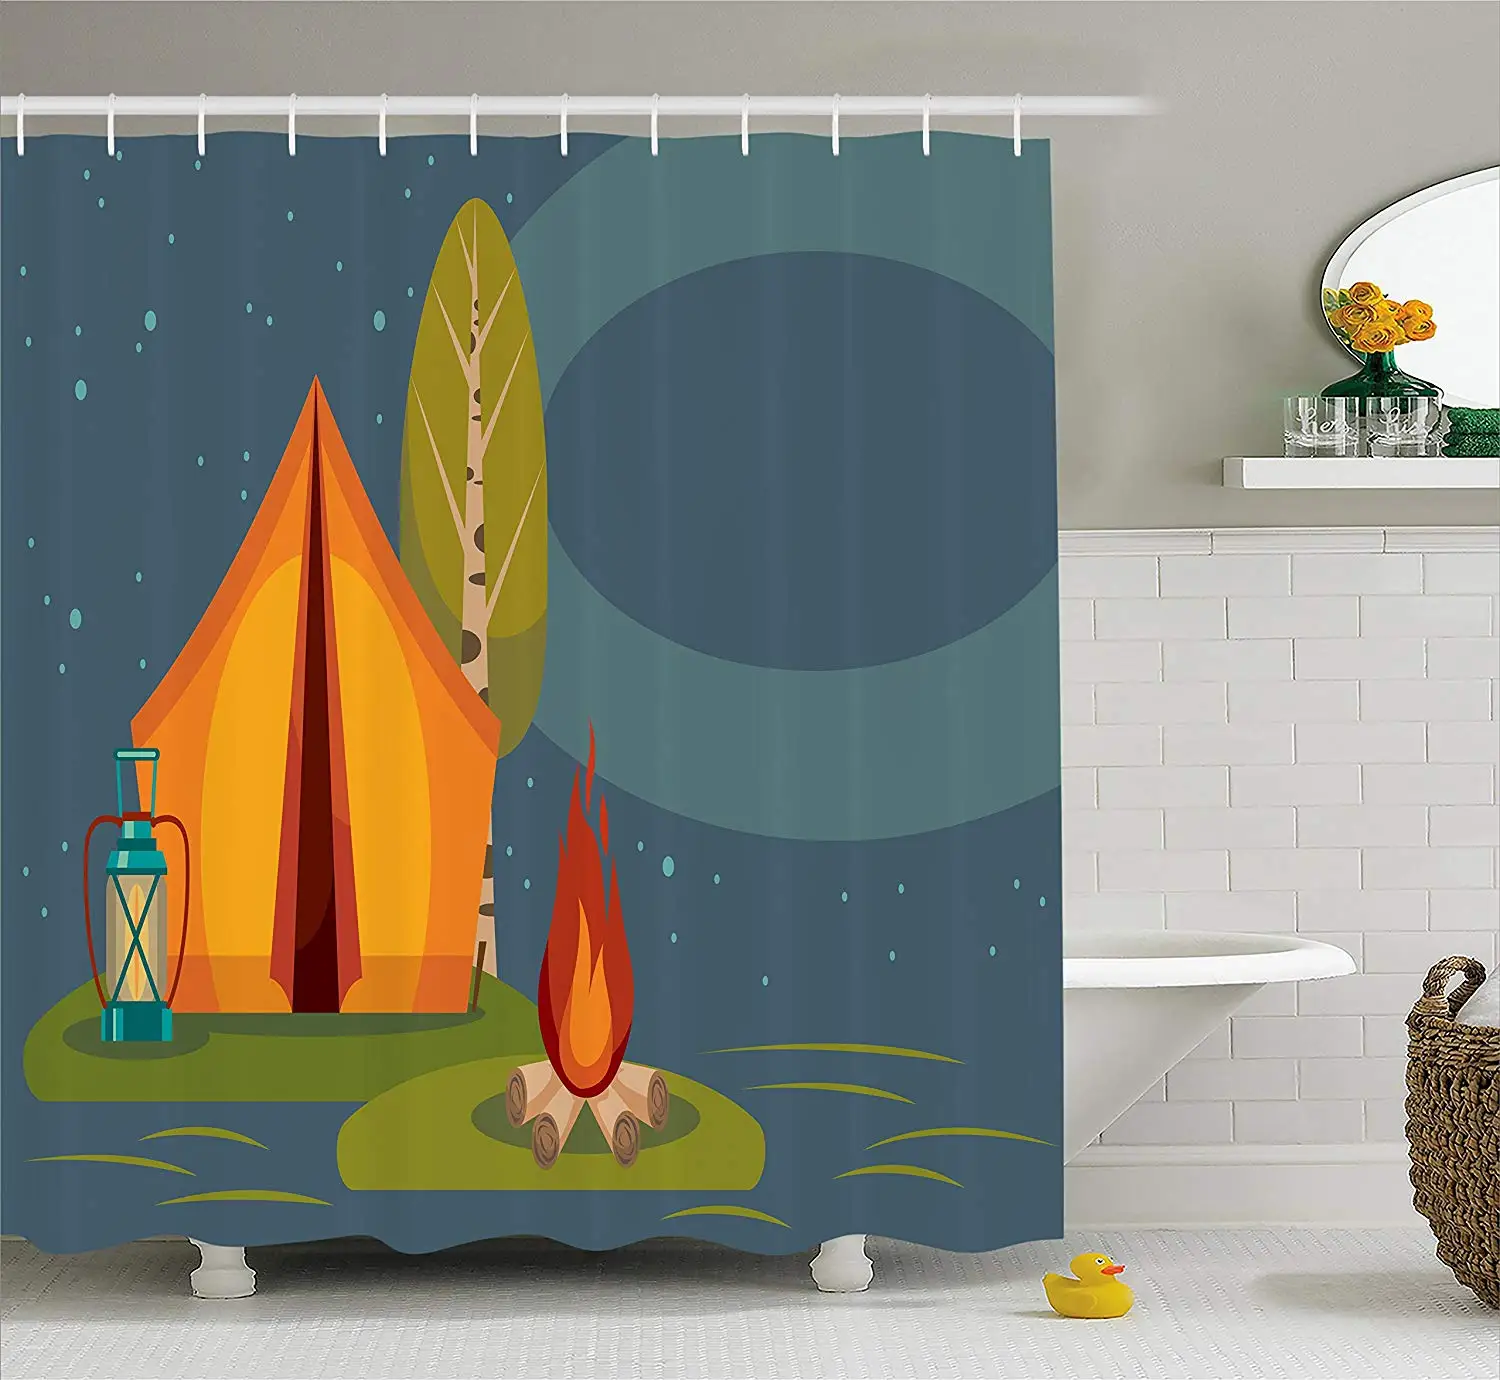 Buy Lunarable Camping Shower Curtain, Summer Outdoor Activity in the ...